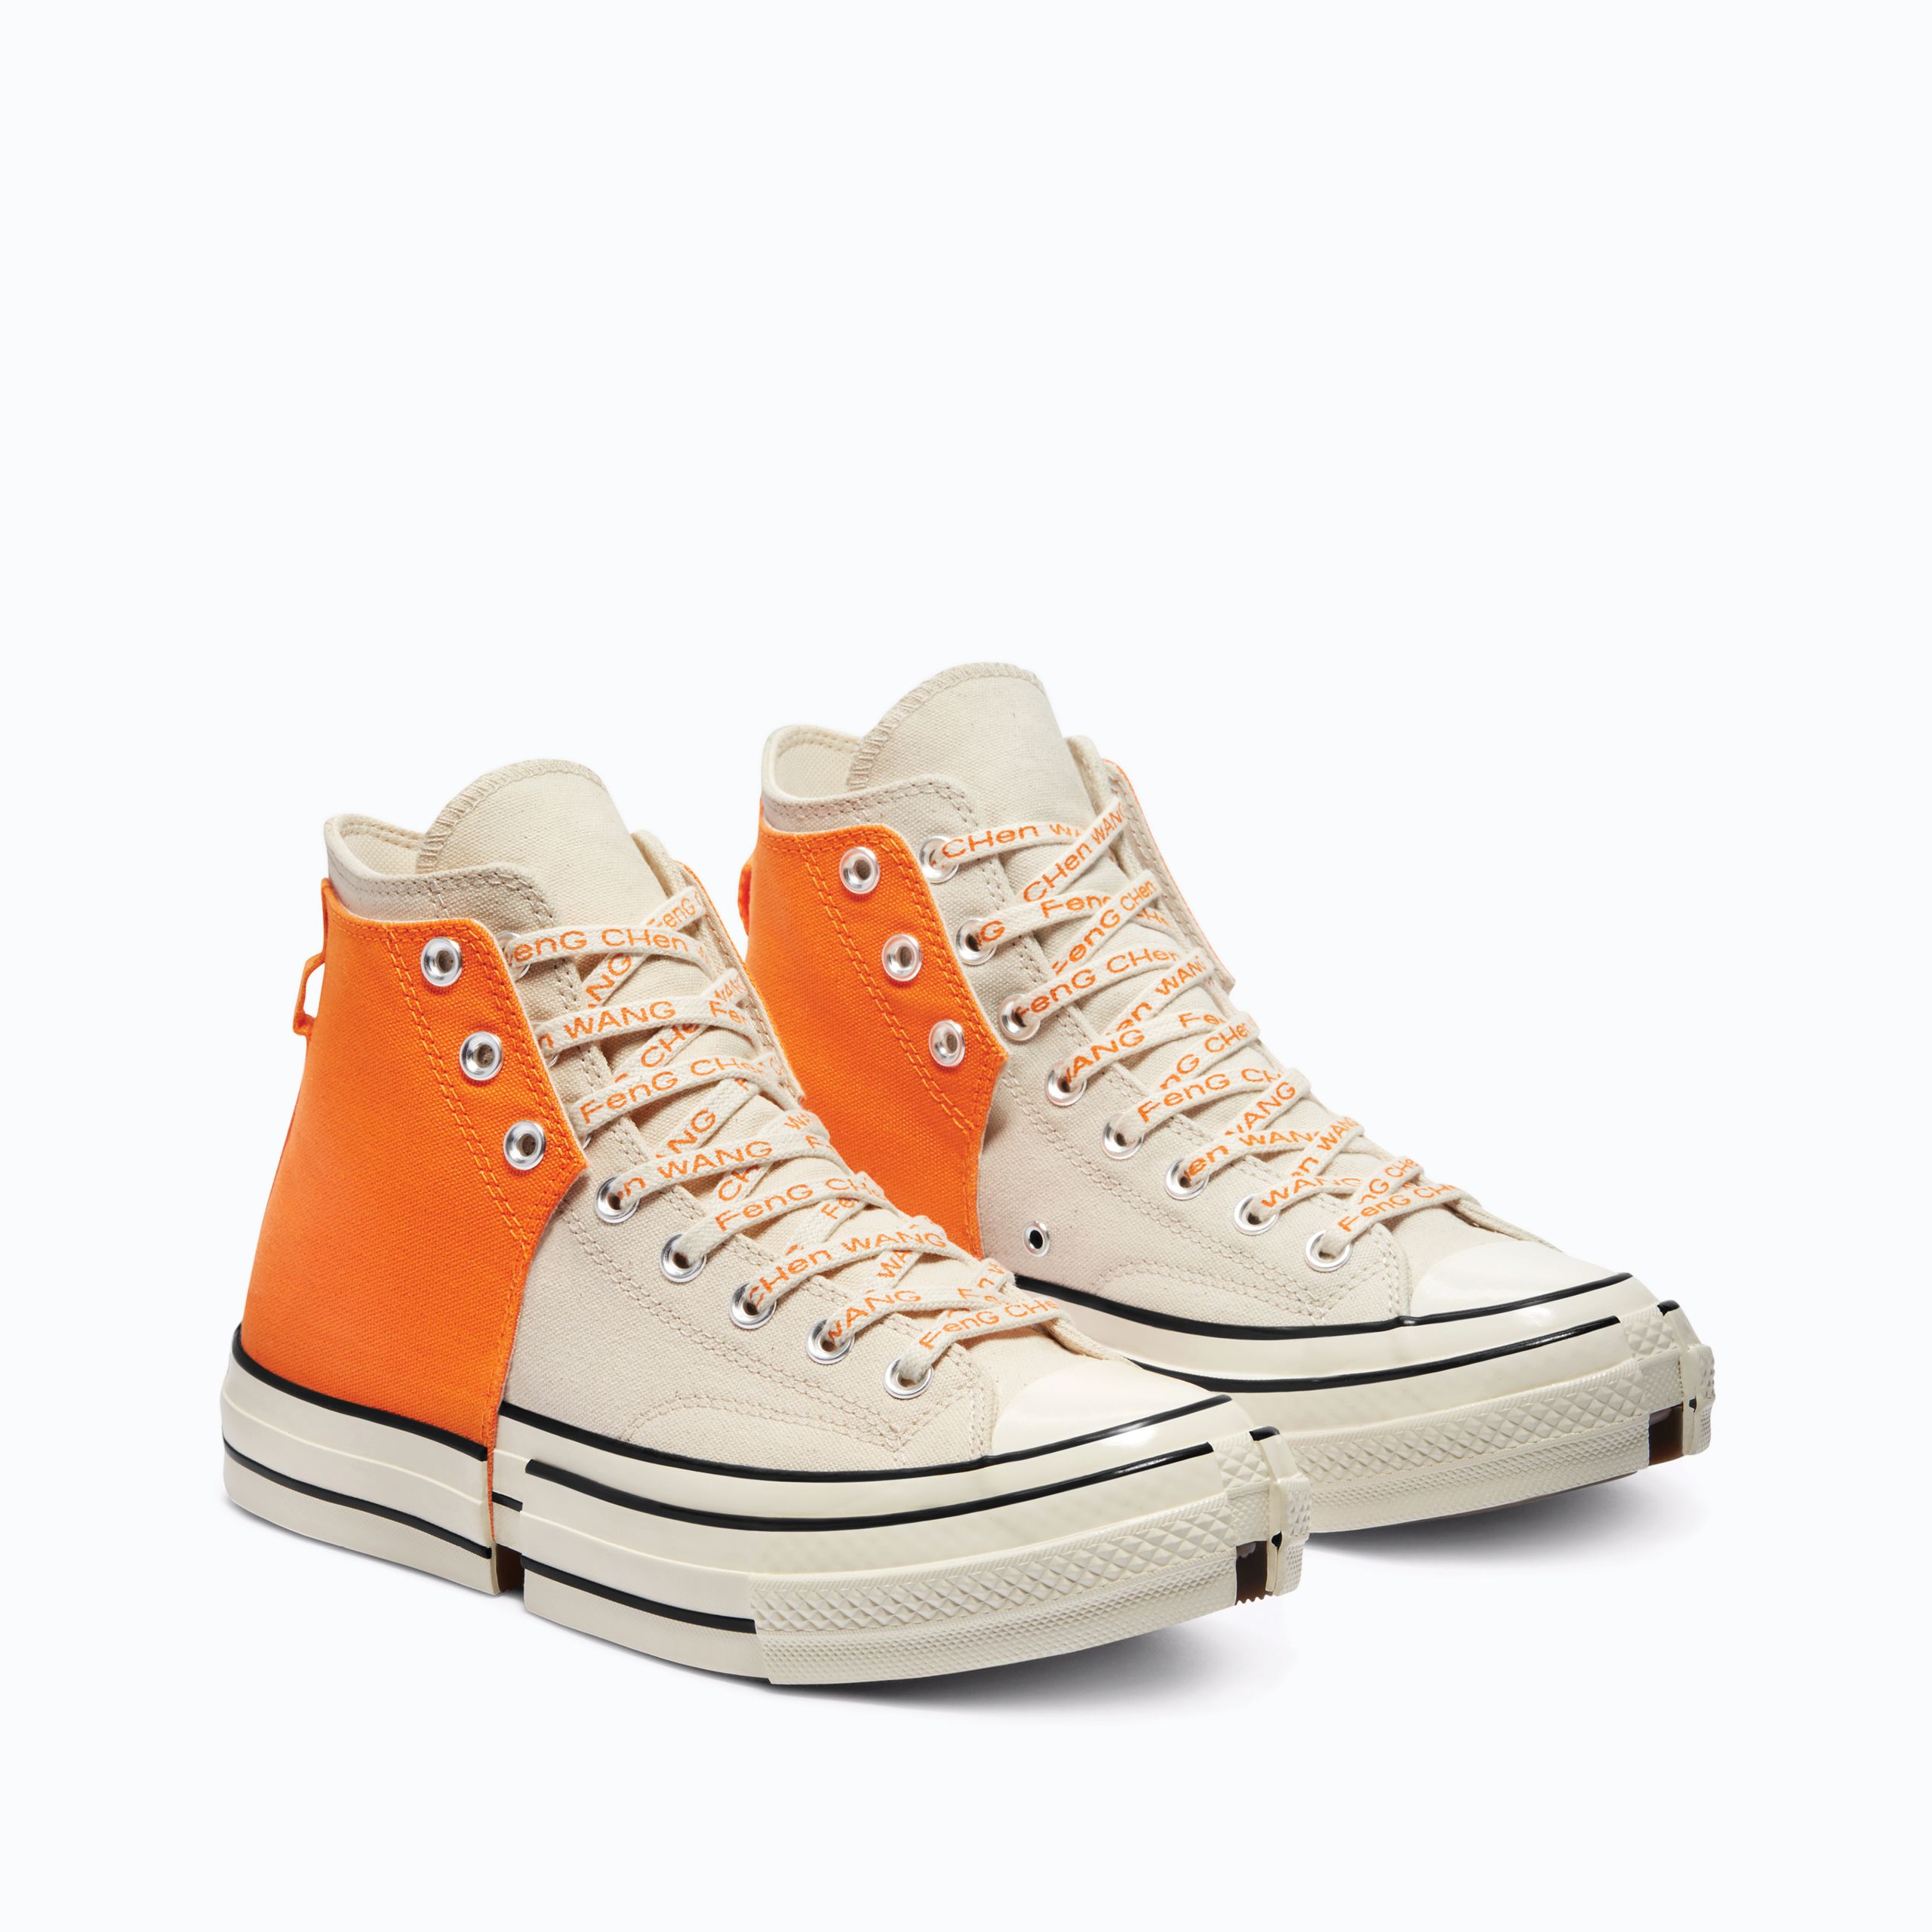 converse trainers website